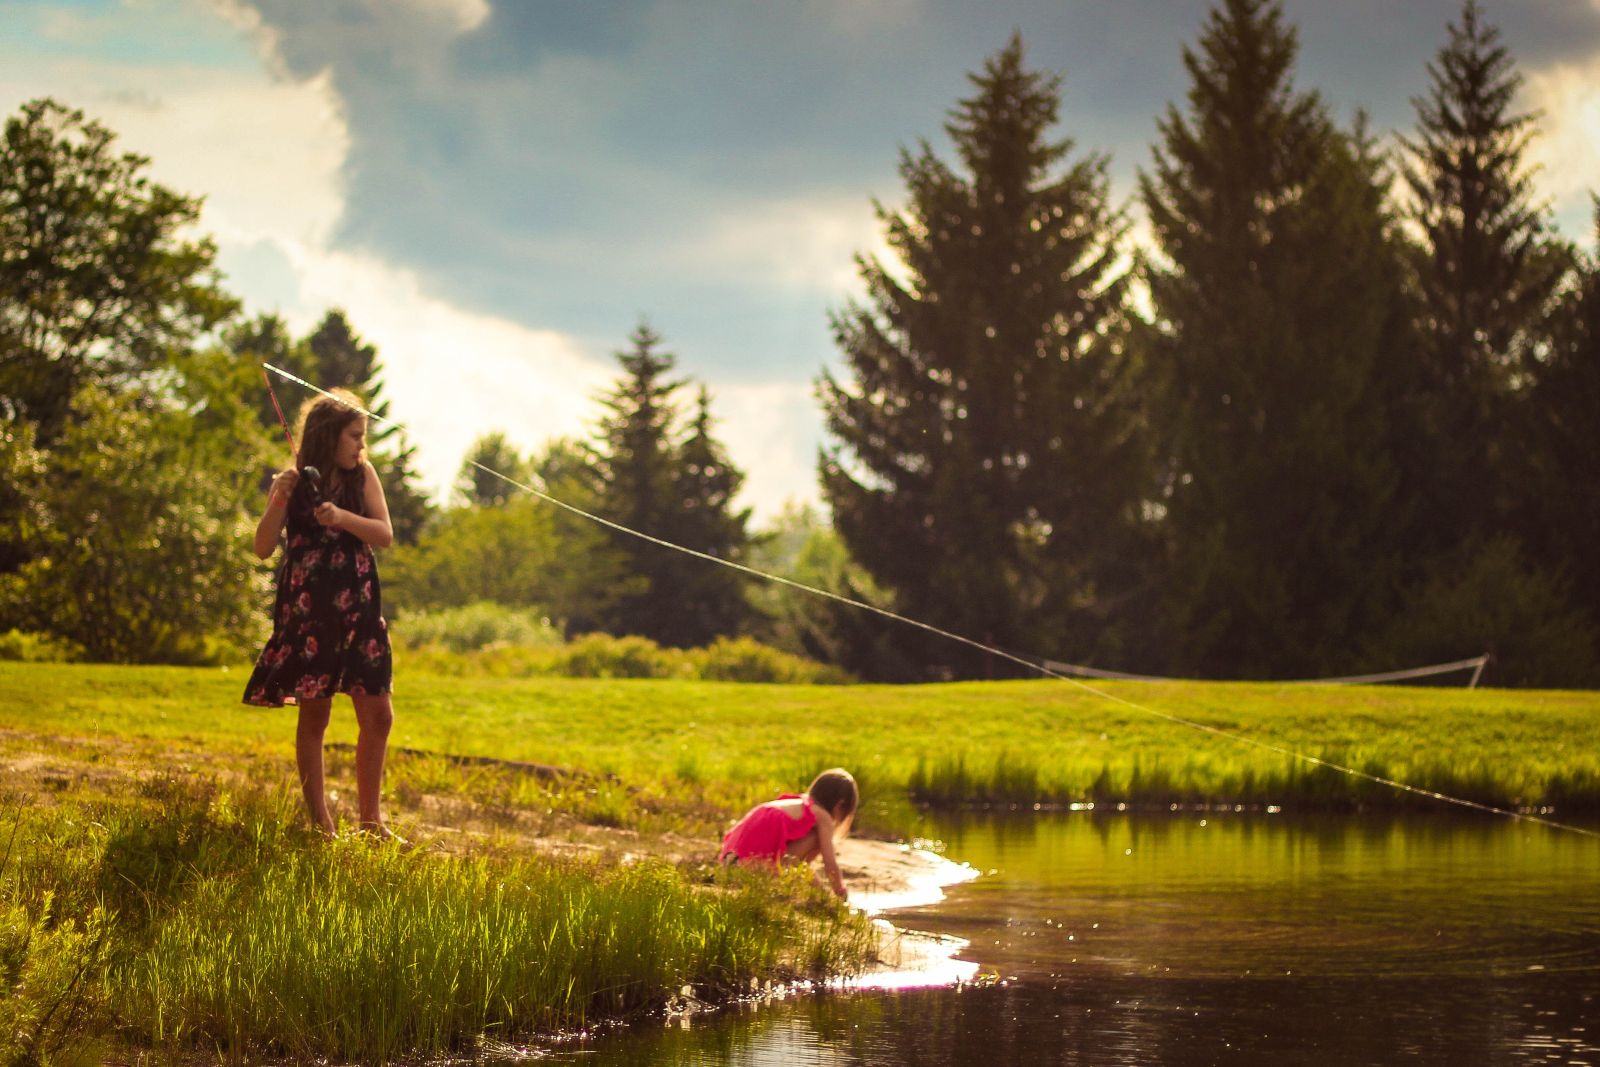 Young girls fishing by a lake in the USA